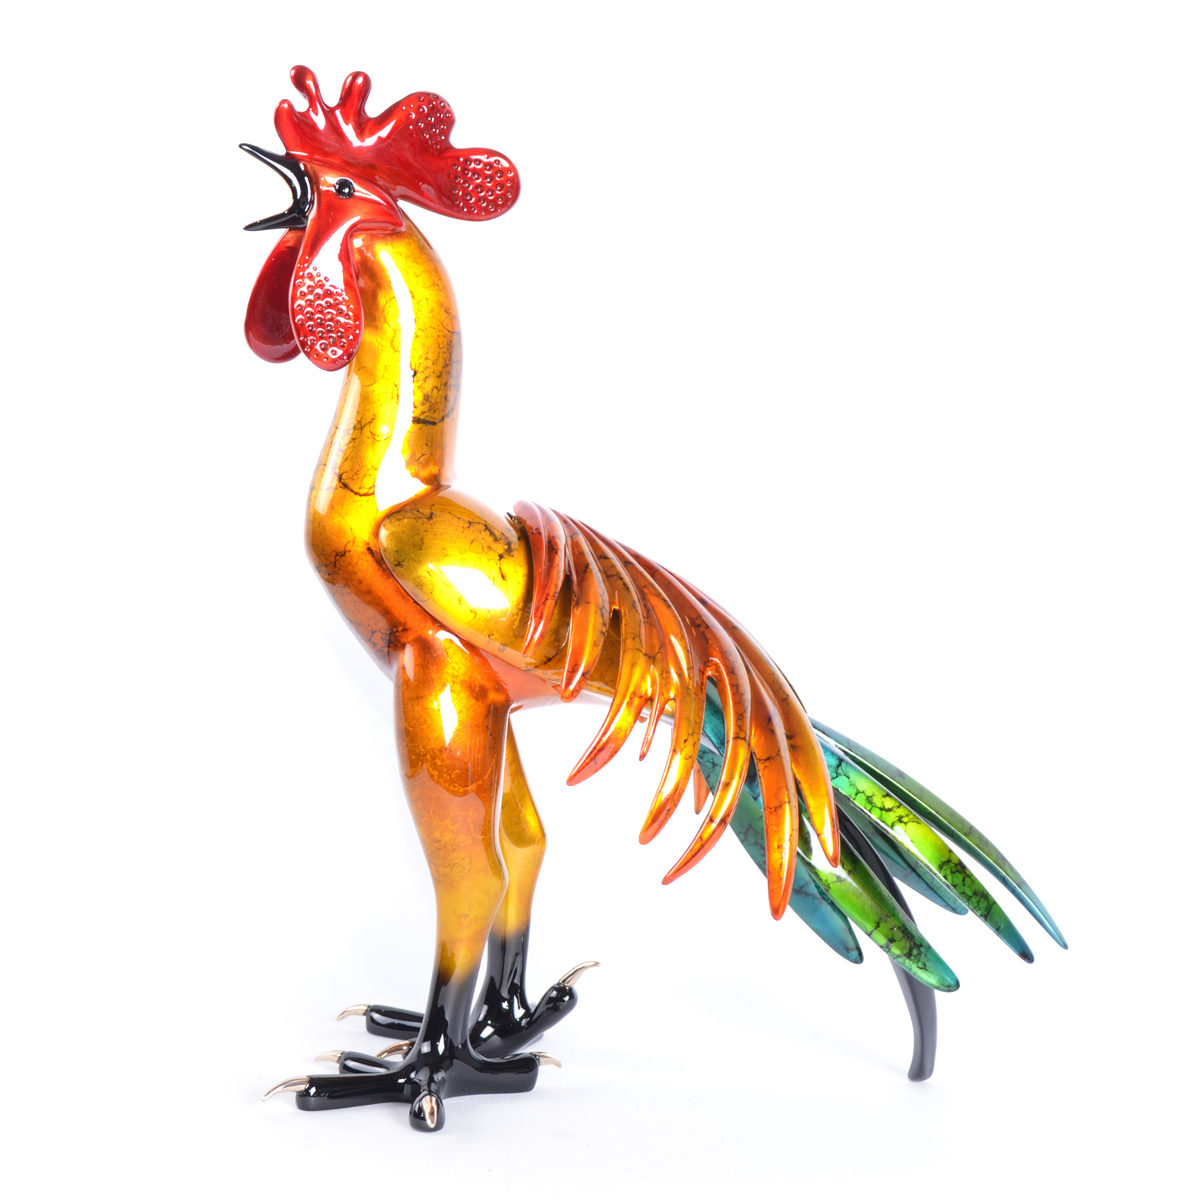 Signed, limited edition bronze rooster sculpture